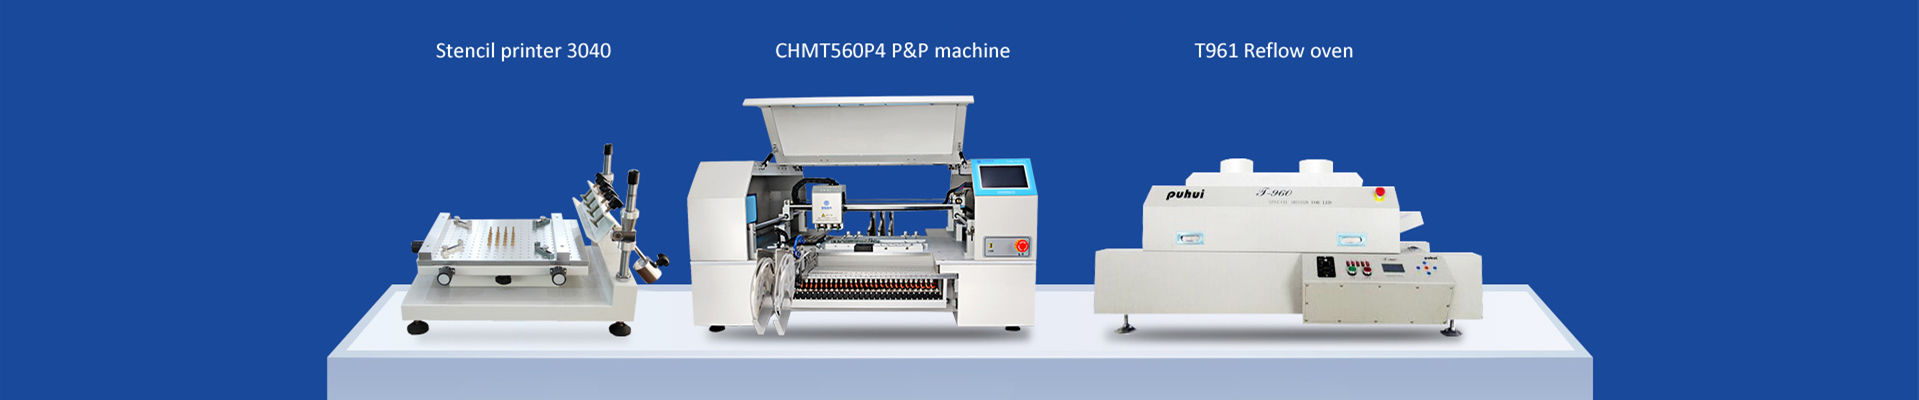 SMT Pick and Place Machine, SMT Production Line, SMT Reflow Oven, Stencil Priner, Yamaha Feeders, SMT Spare Parts, Promotion - Charmhigh Technology Limited